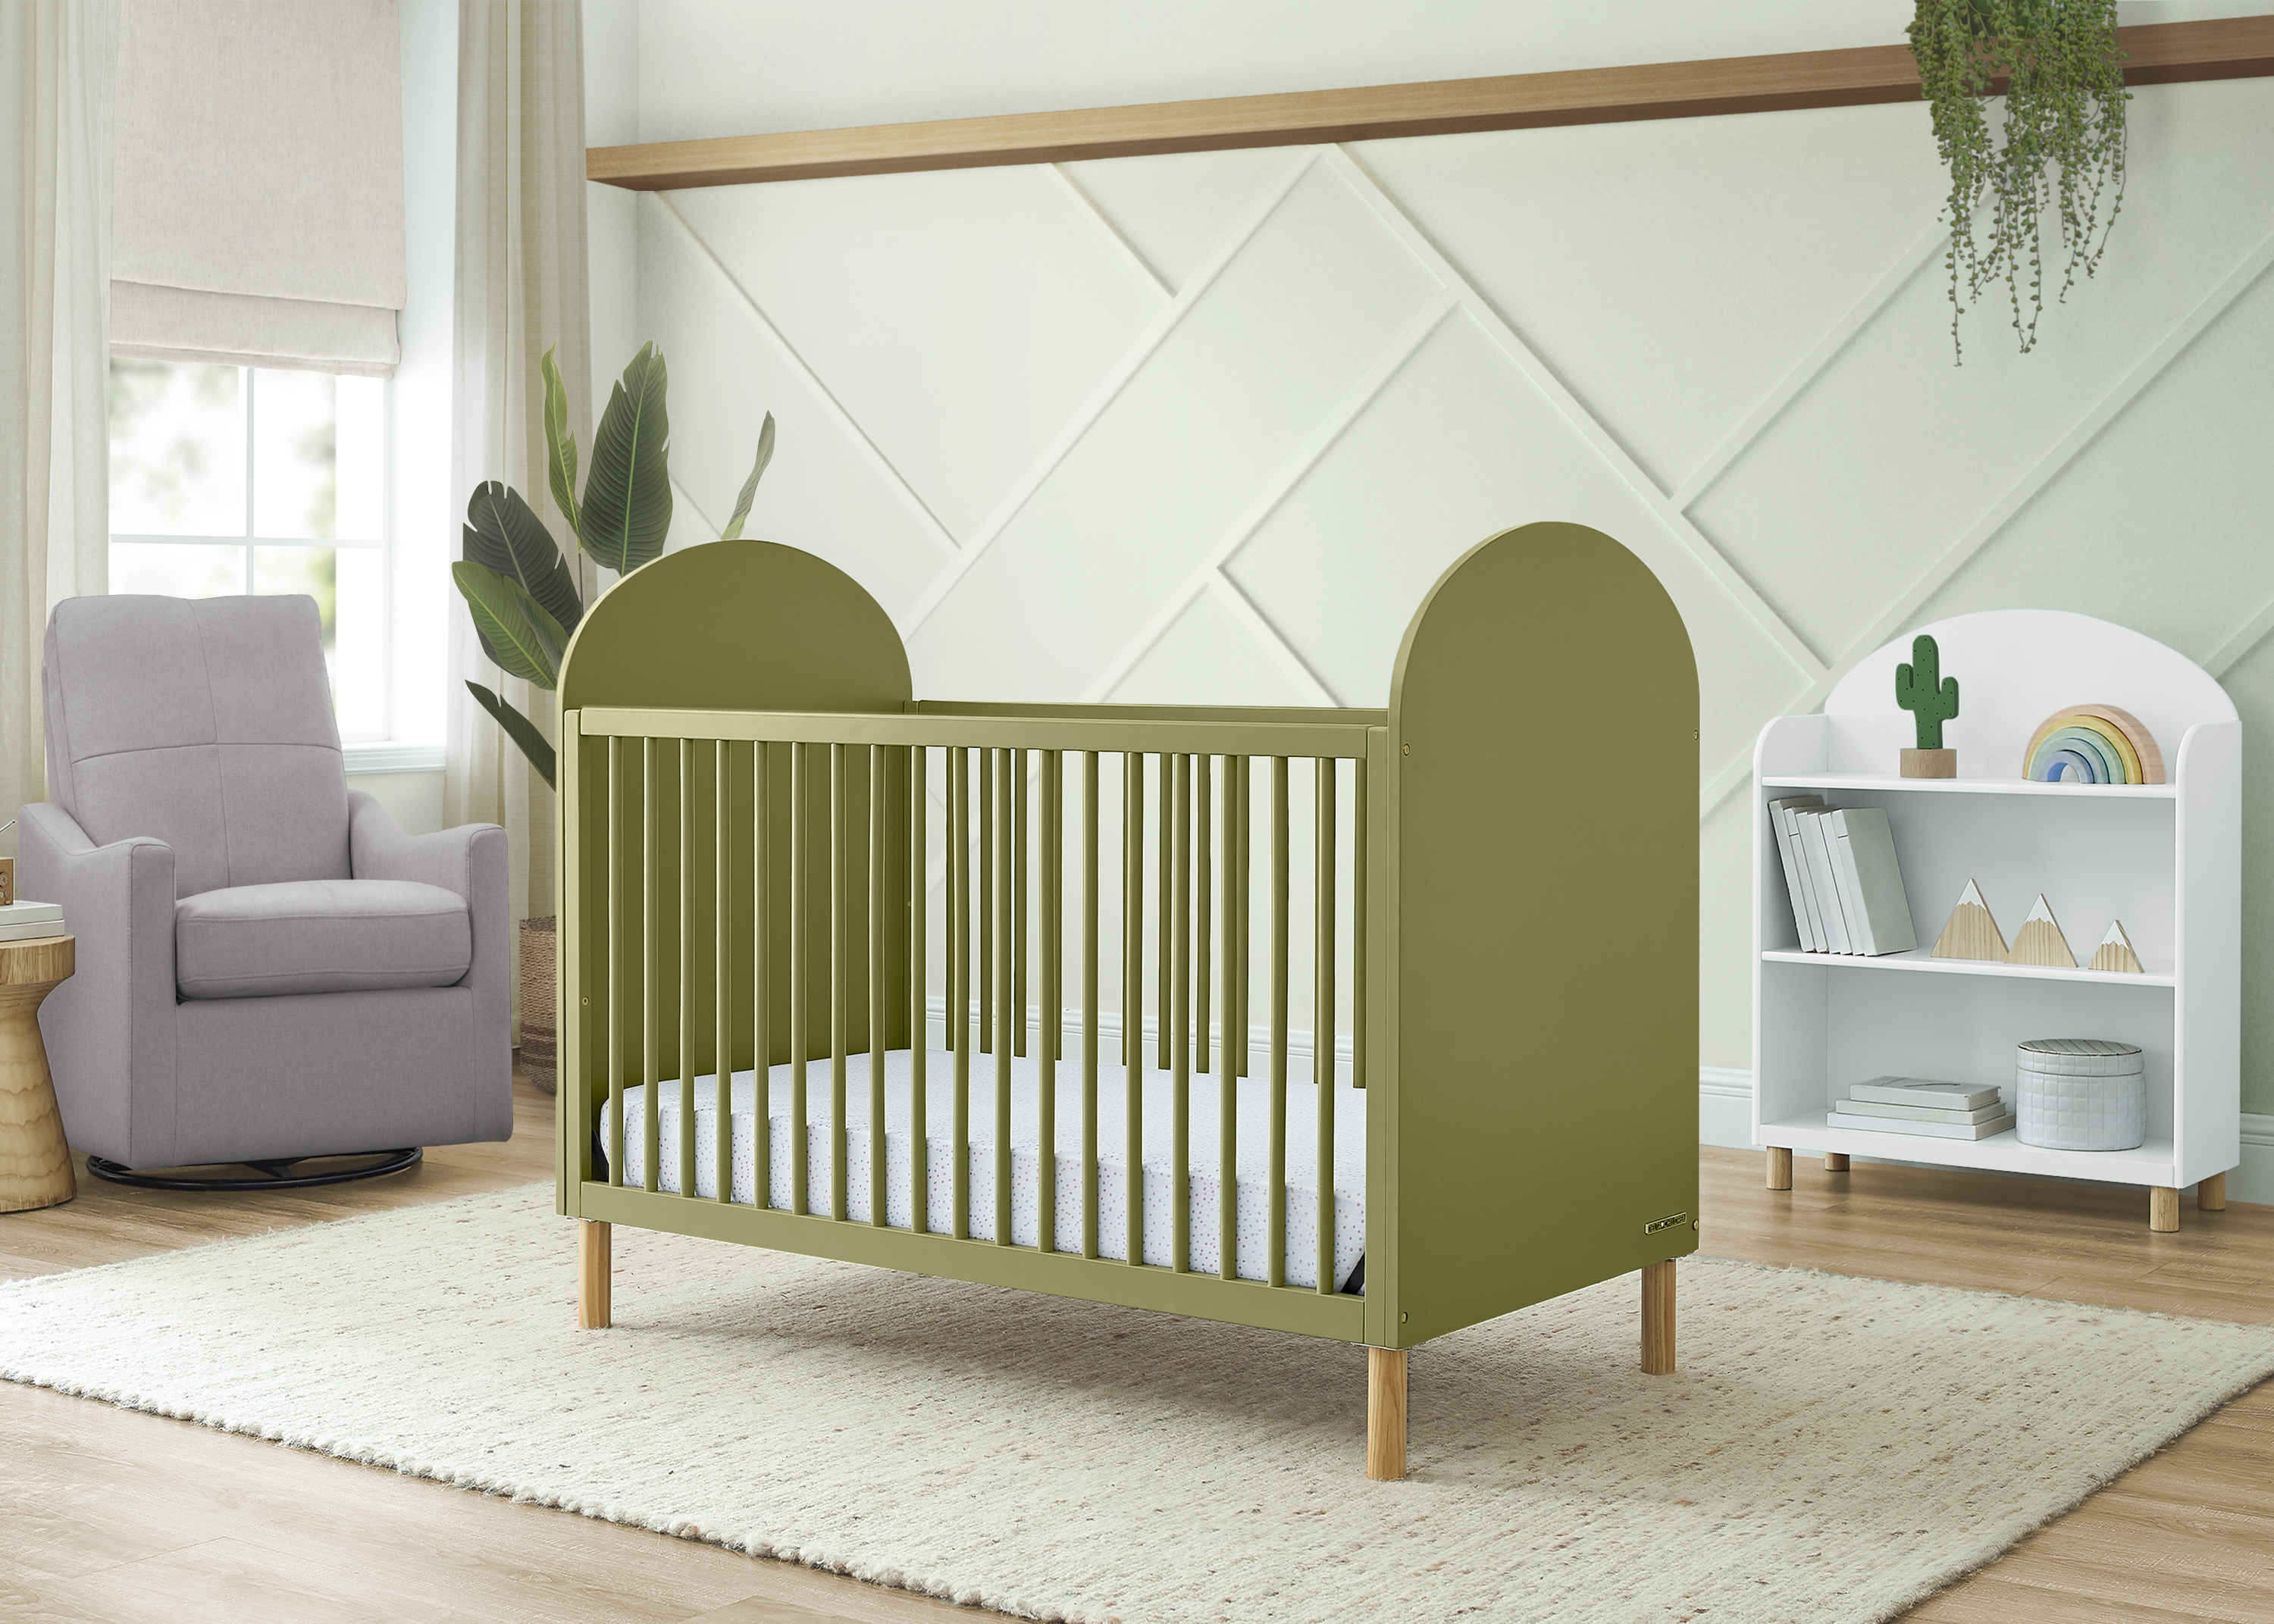 Delta Children Reese 4-in-1 Convertible Crib - Greenguard Gold Certified, Olive Green/Natural - image 4 of 17